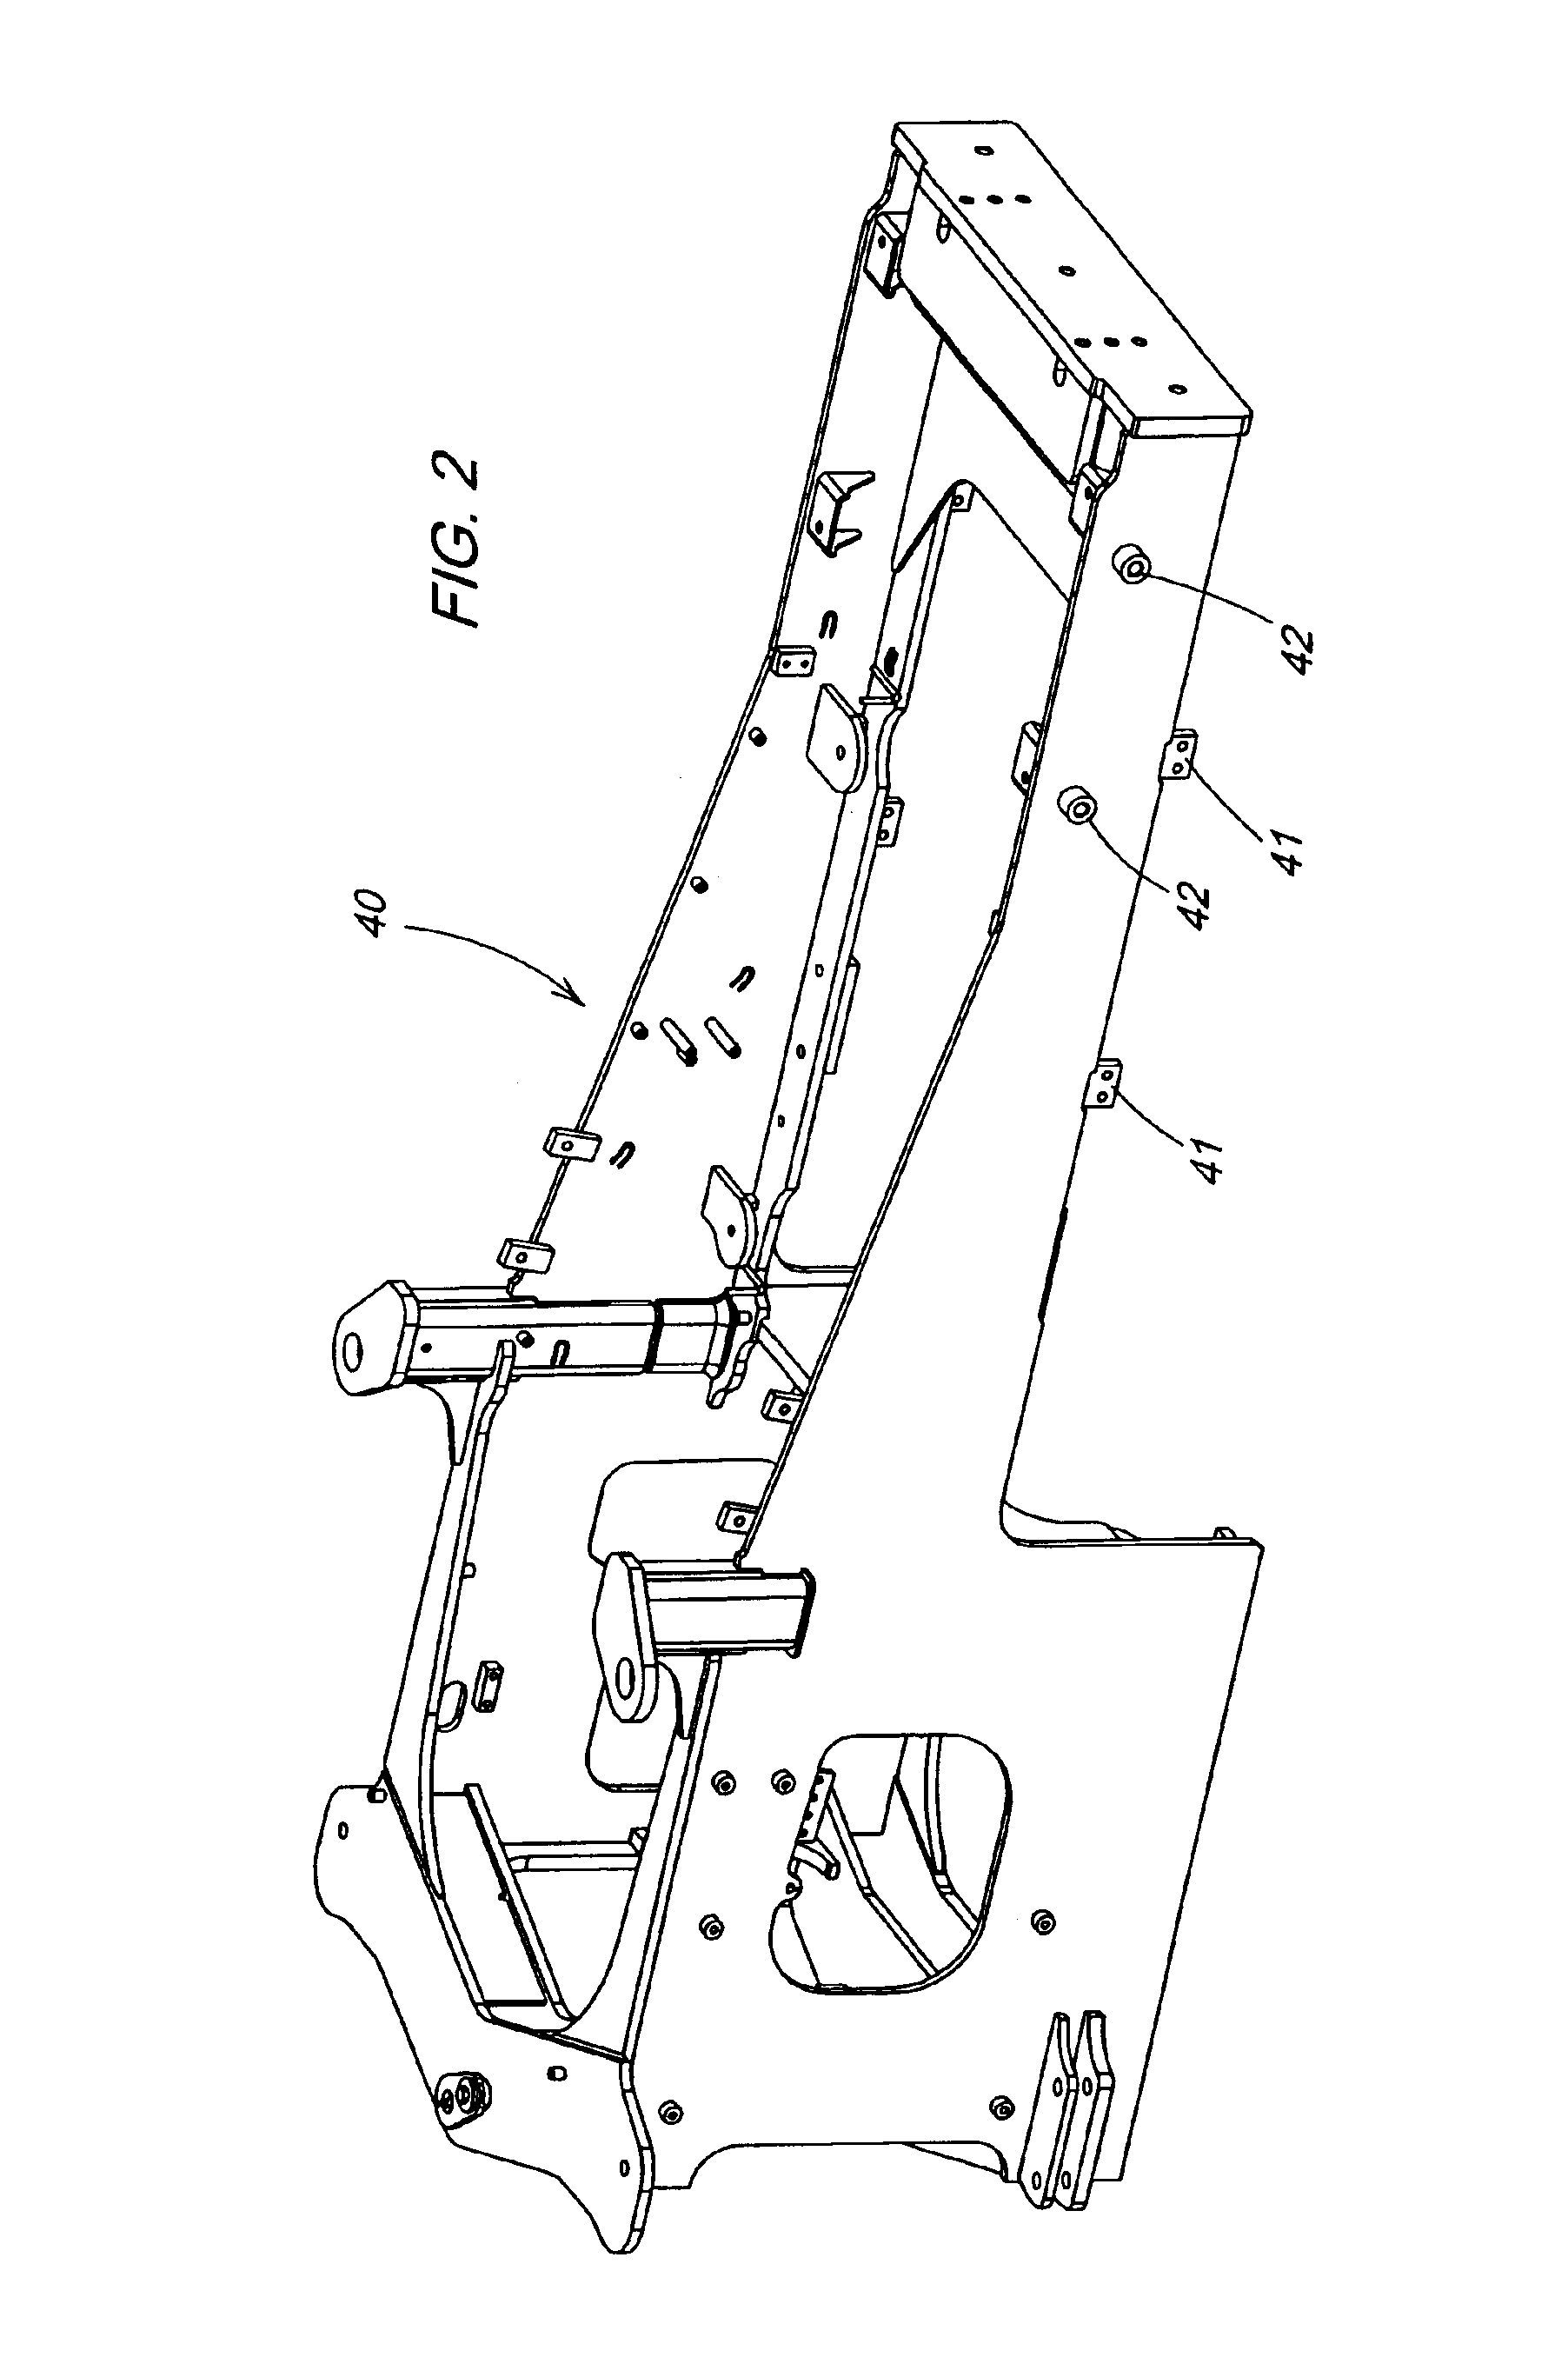 Integrated fuel tank and complementary counterweight